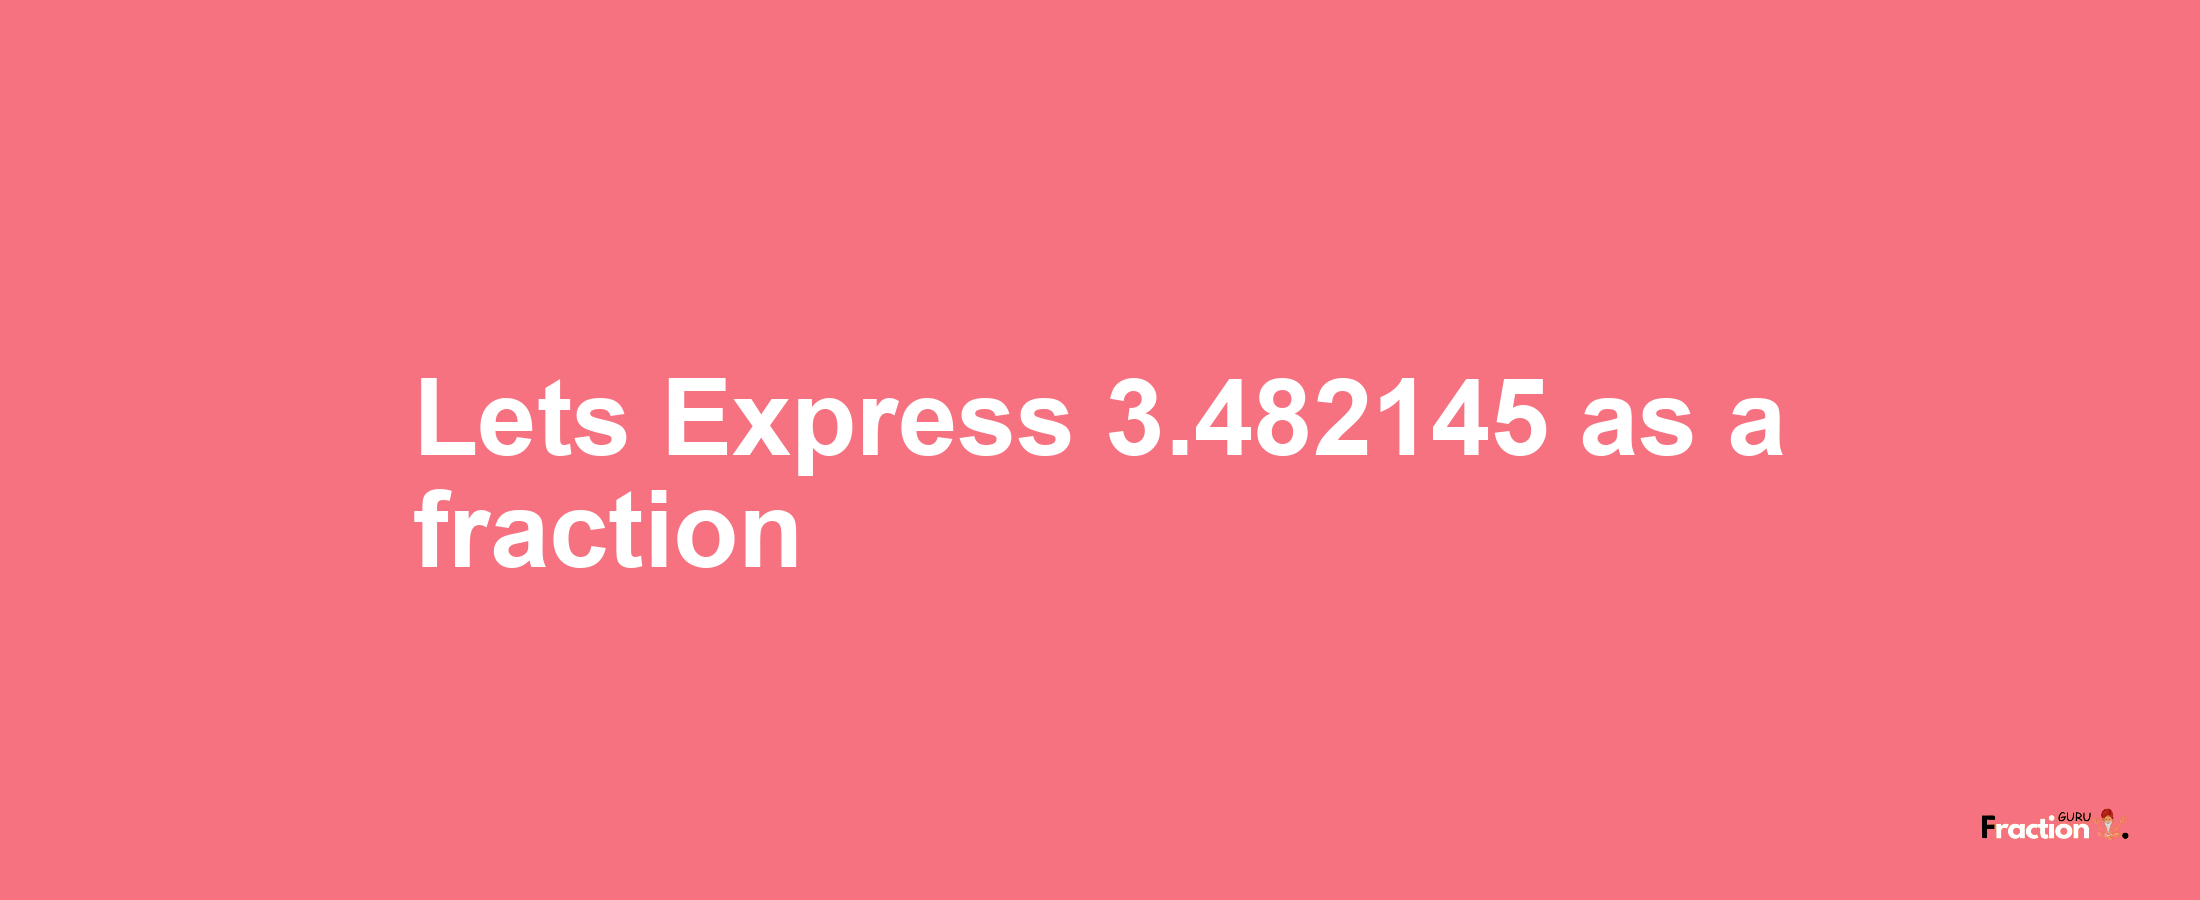 Lets Express 3.482145 as afraction